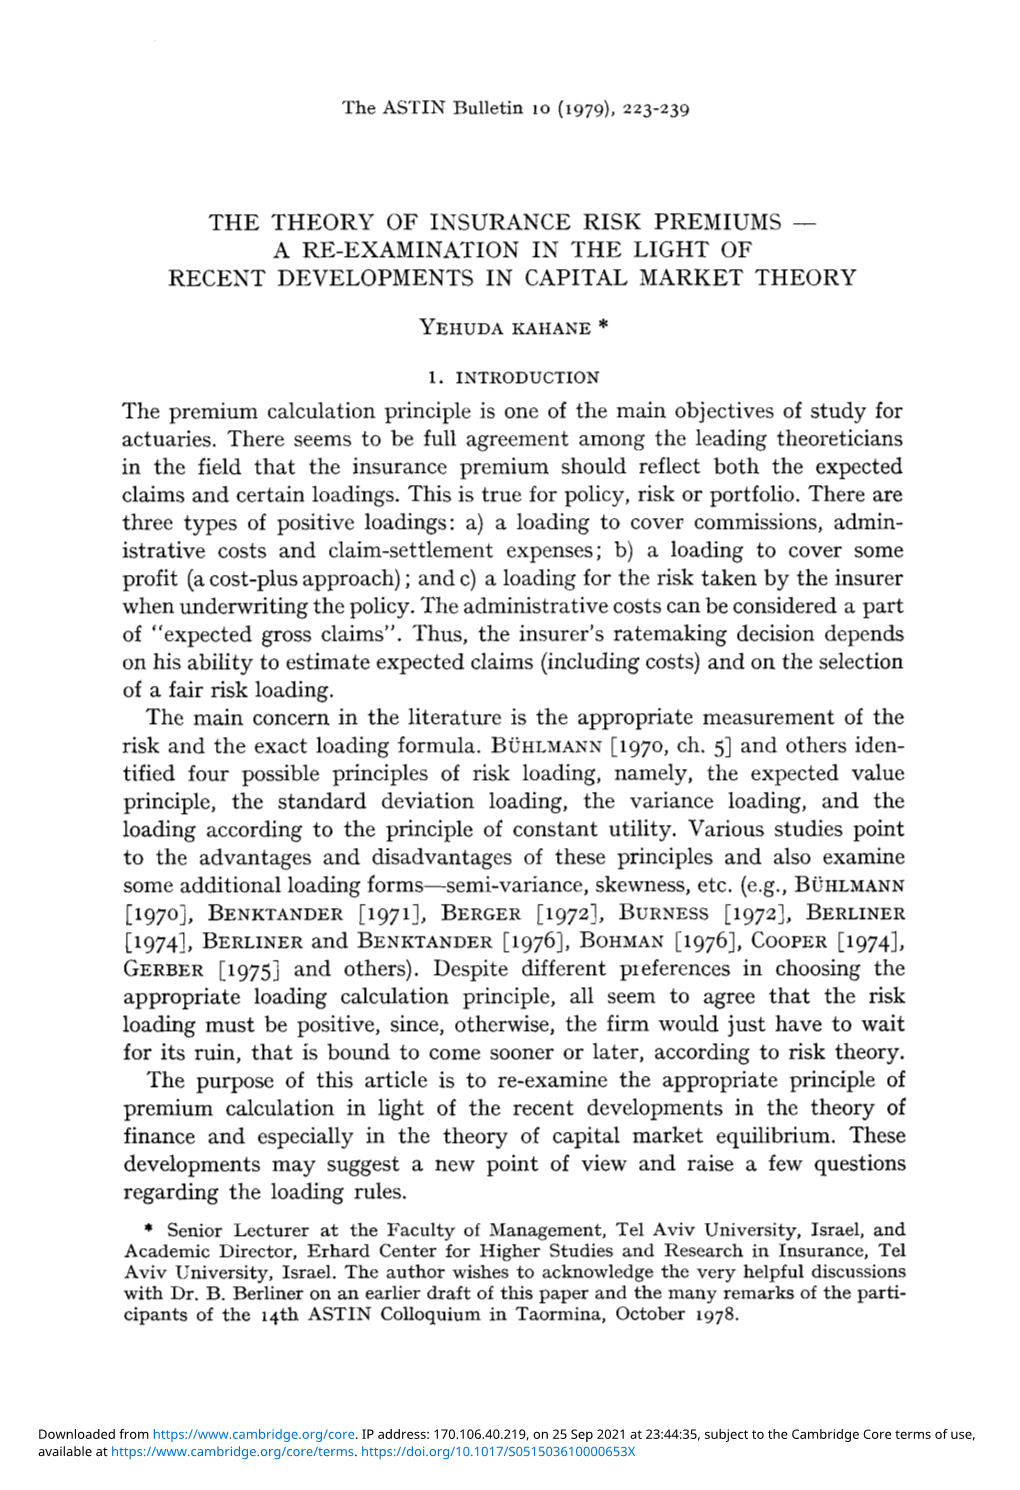 The Theory of Insurance Risk Premiums — a Re-Examination in the Light of Recent Developments in Capital Market Theory